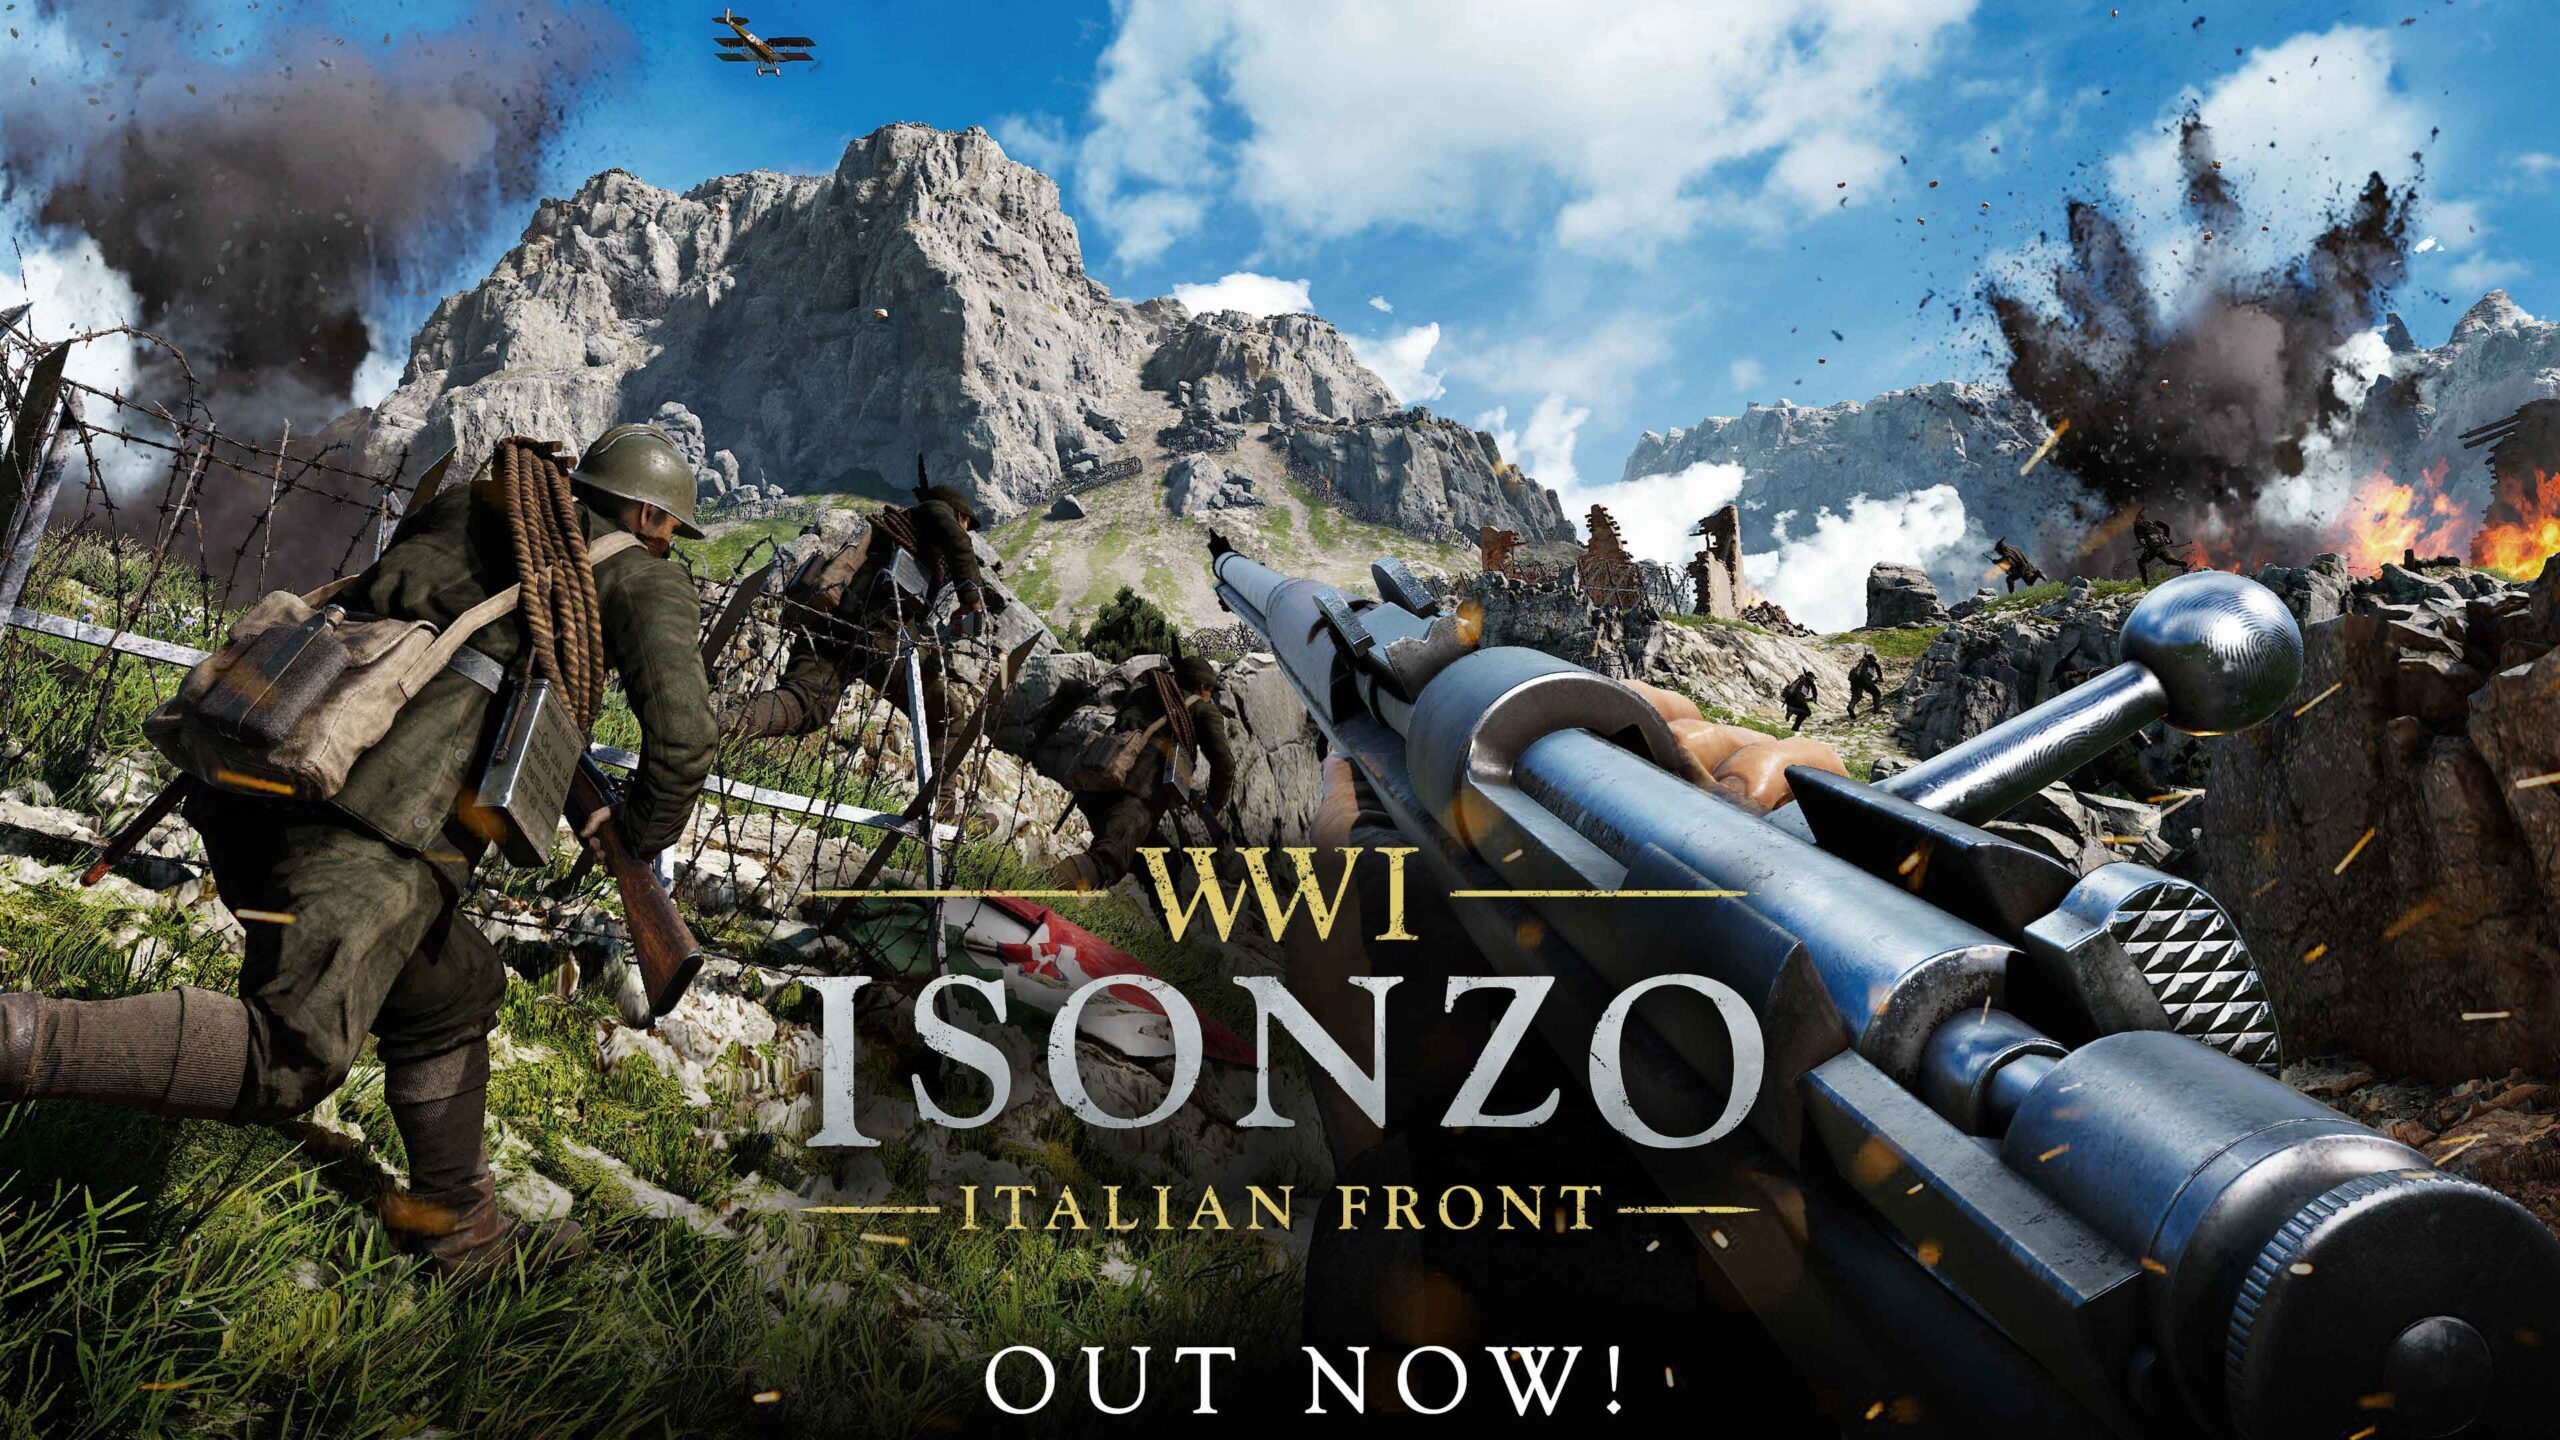 Video For WW1 FPS Isonzo is out Now